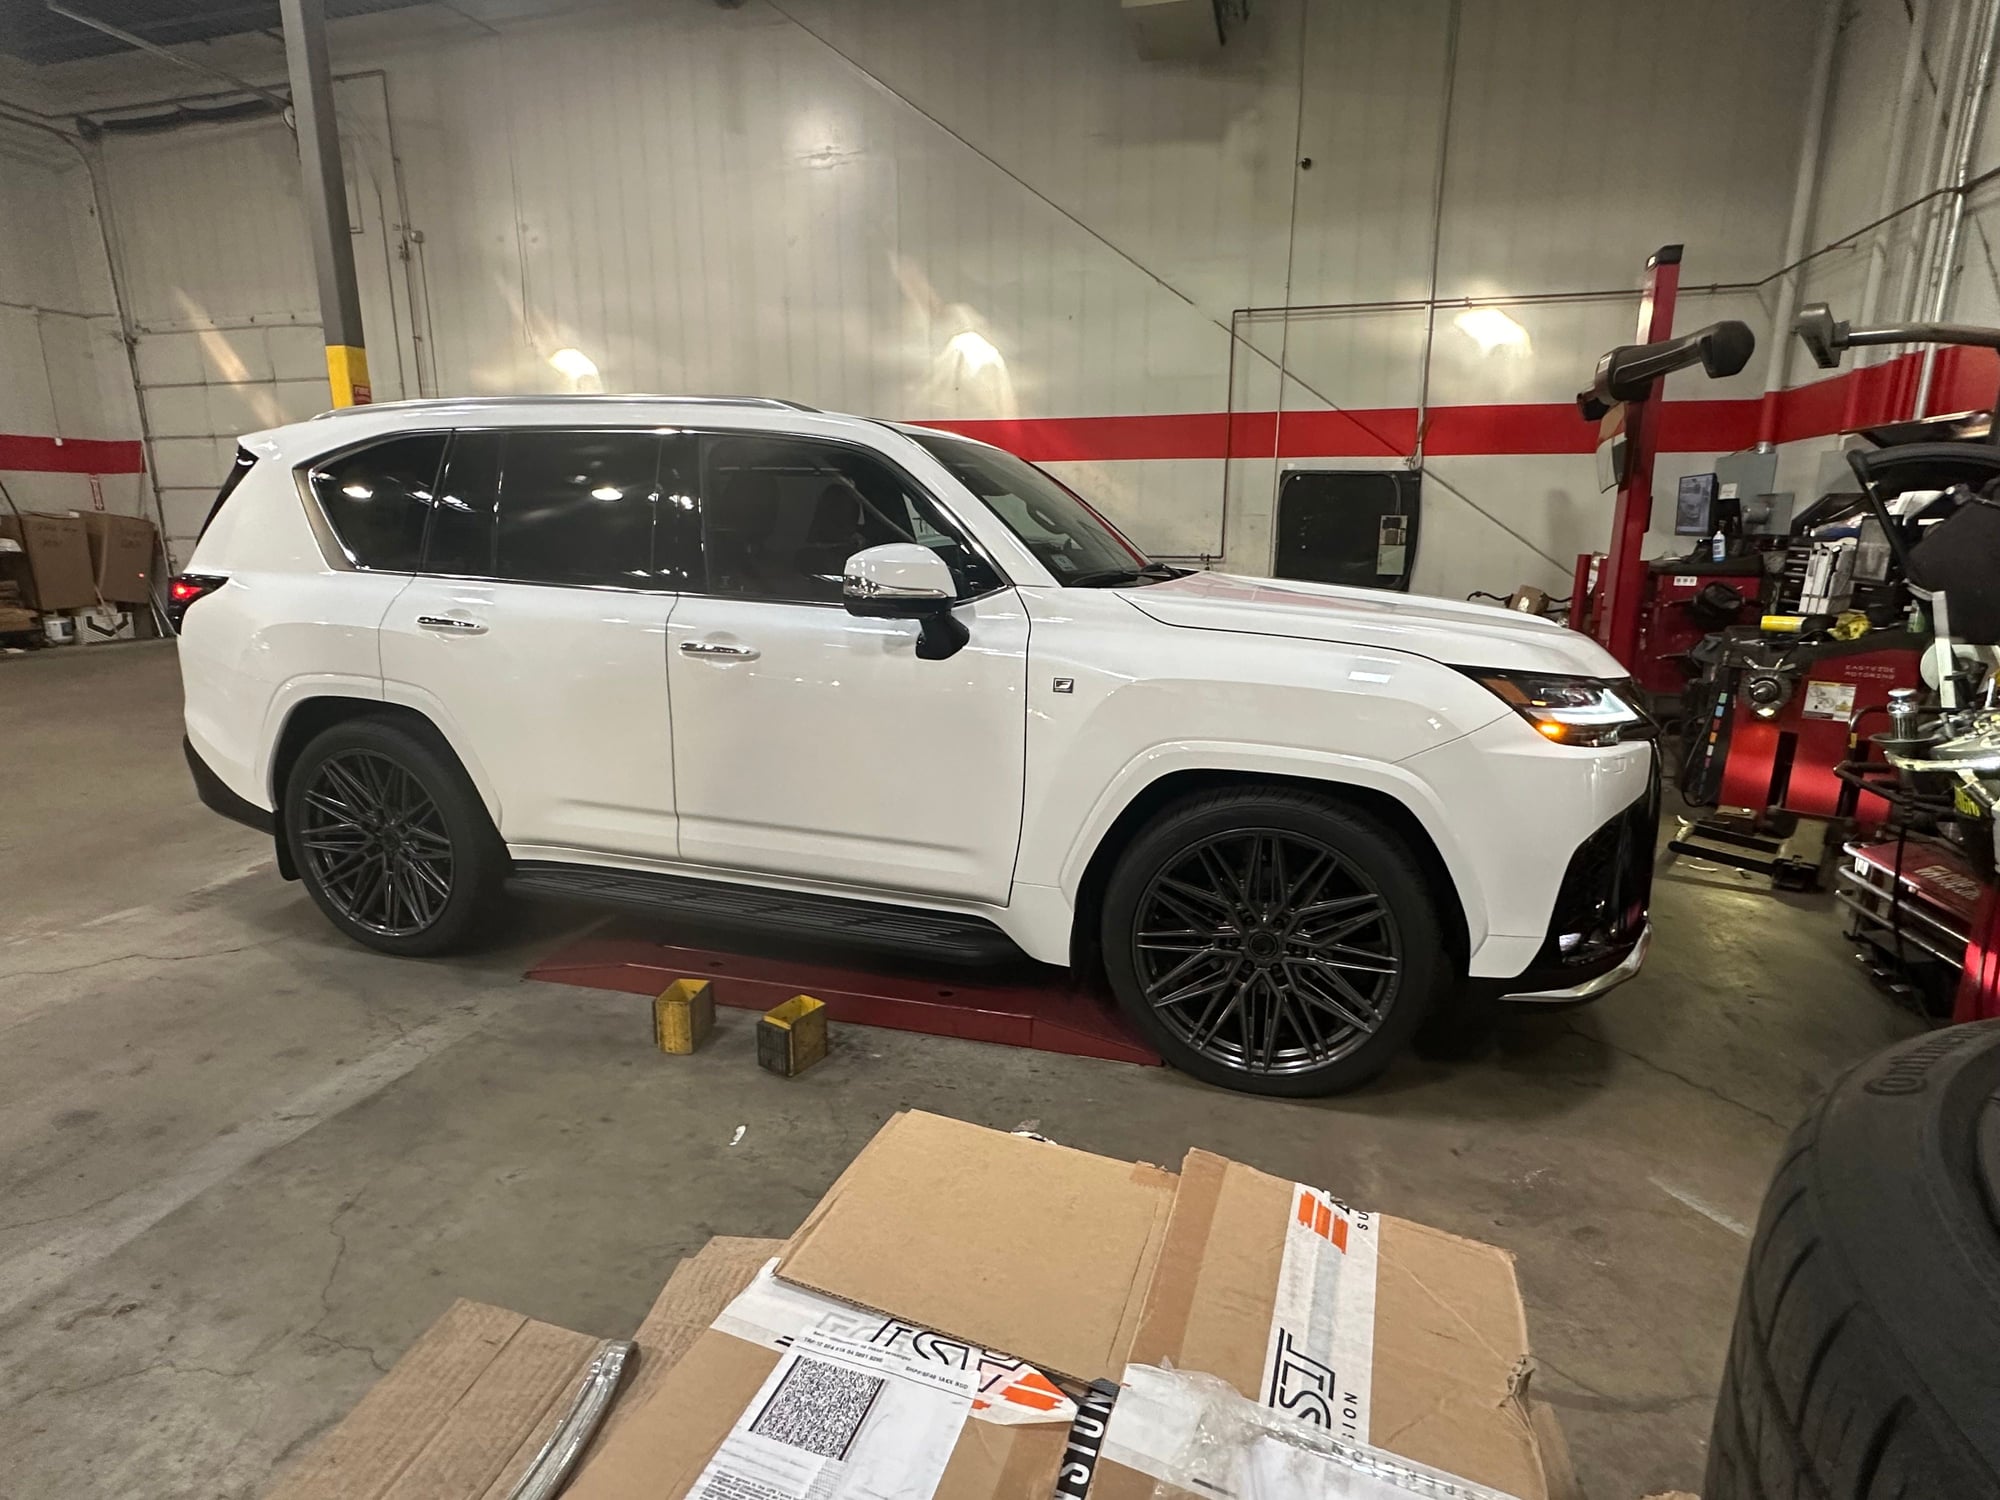 Wheels and Tires/Axles - Vossen HF6-5 24x10 for sale LEXUS LX600 - 5 WHEELS 4+1 - Used - 2022 to 2025 Lexus LX - Bedford, MA 01730, United States